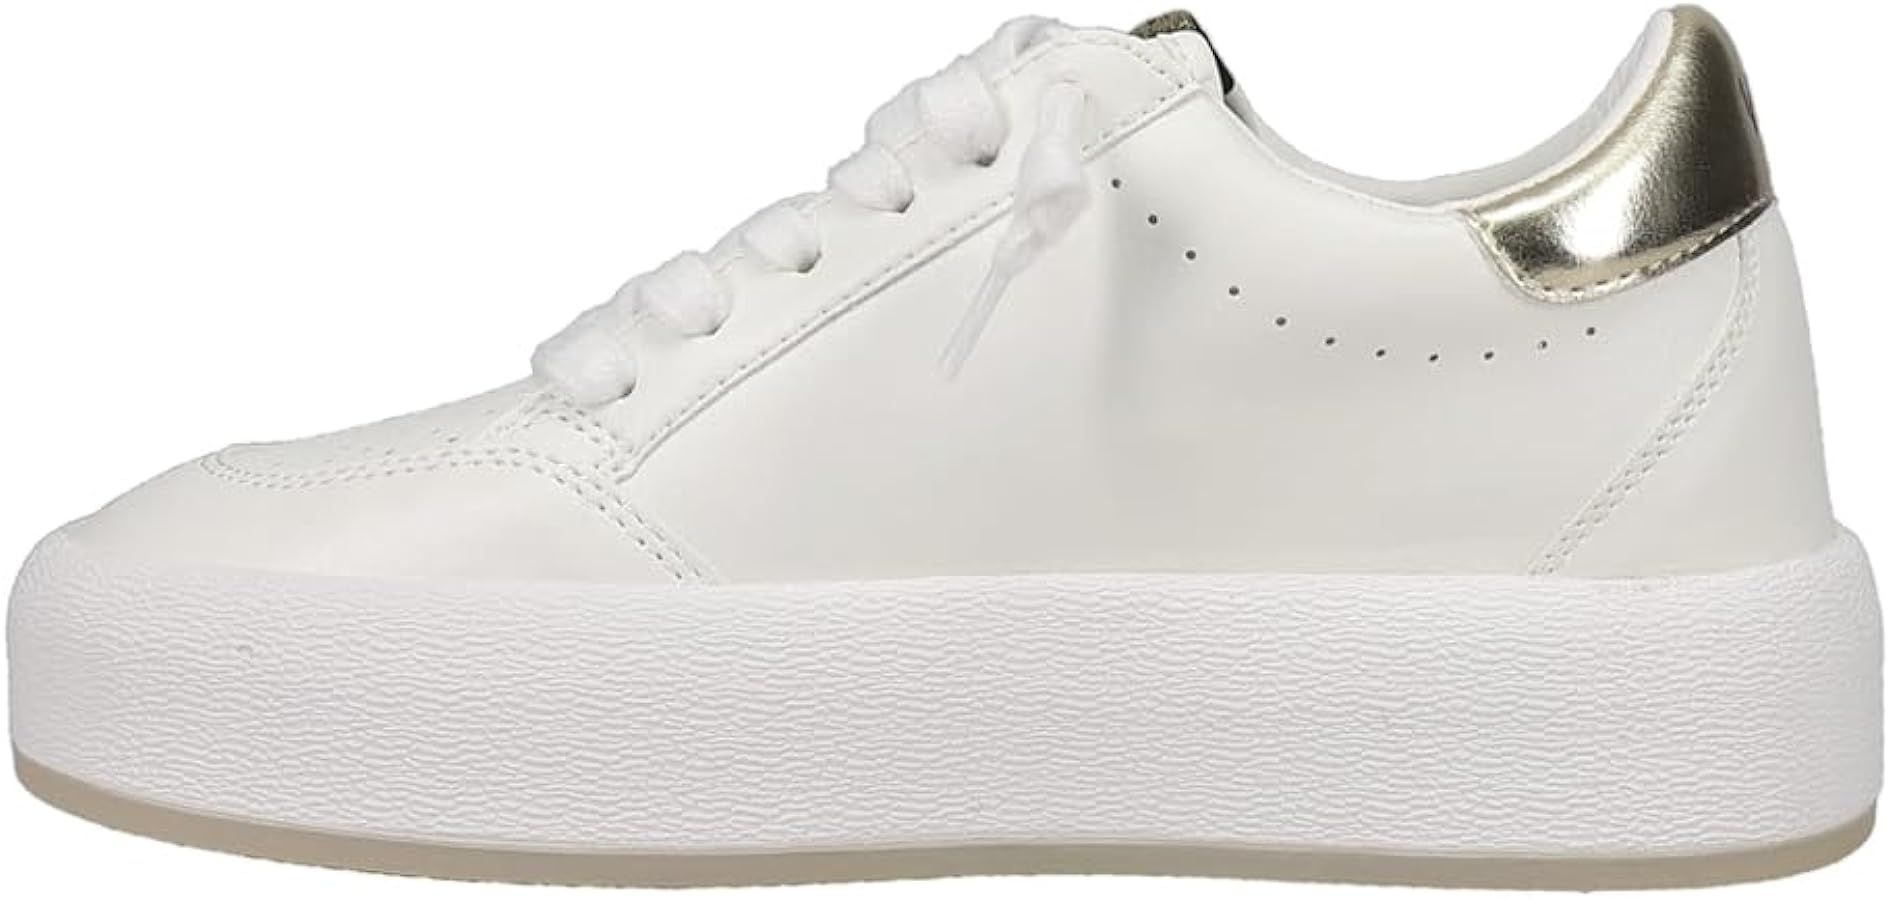 VINTAGE HAVANA Womens Ream Slip On Sneakers Shoes Casual - White | Amazon (US)